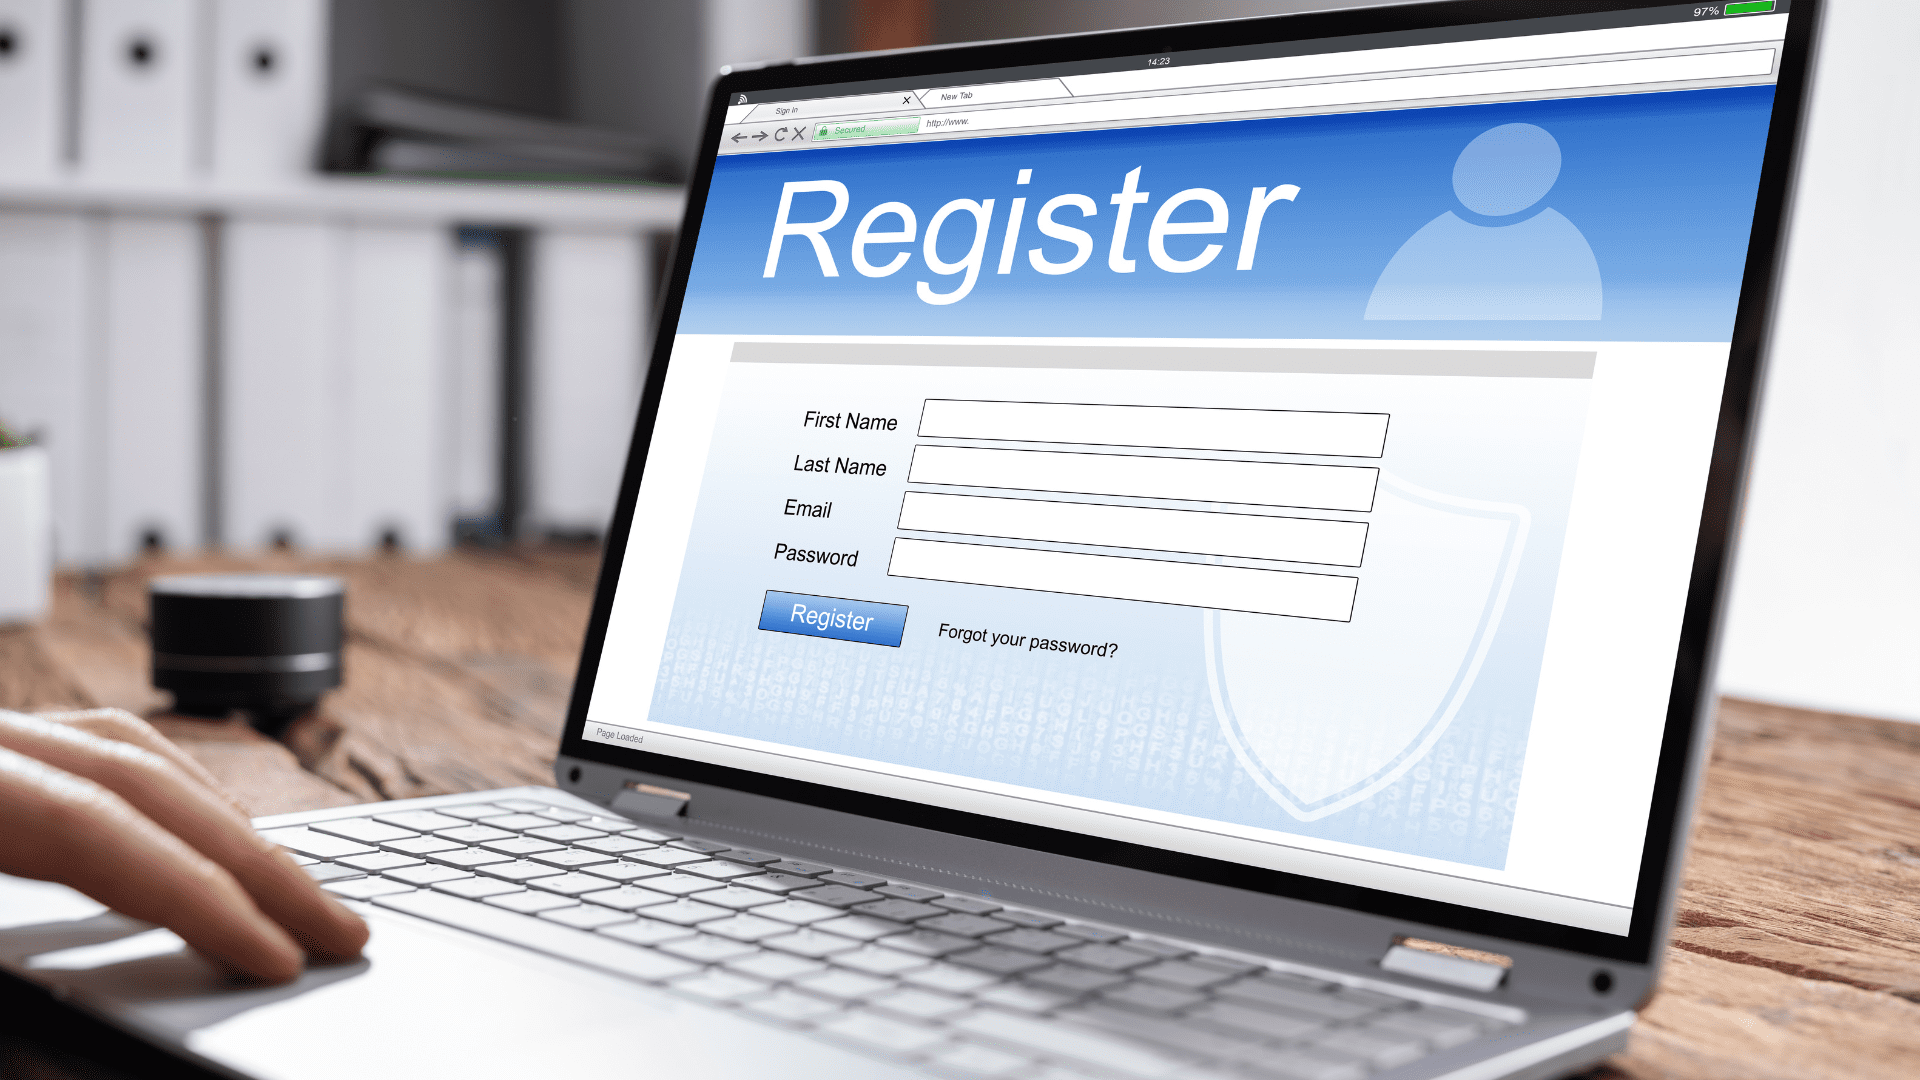 Online Registration Form: Efficient Way For Data Collection
